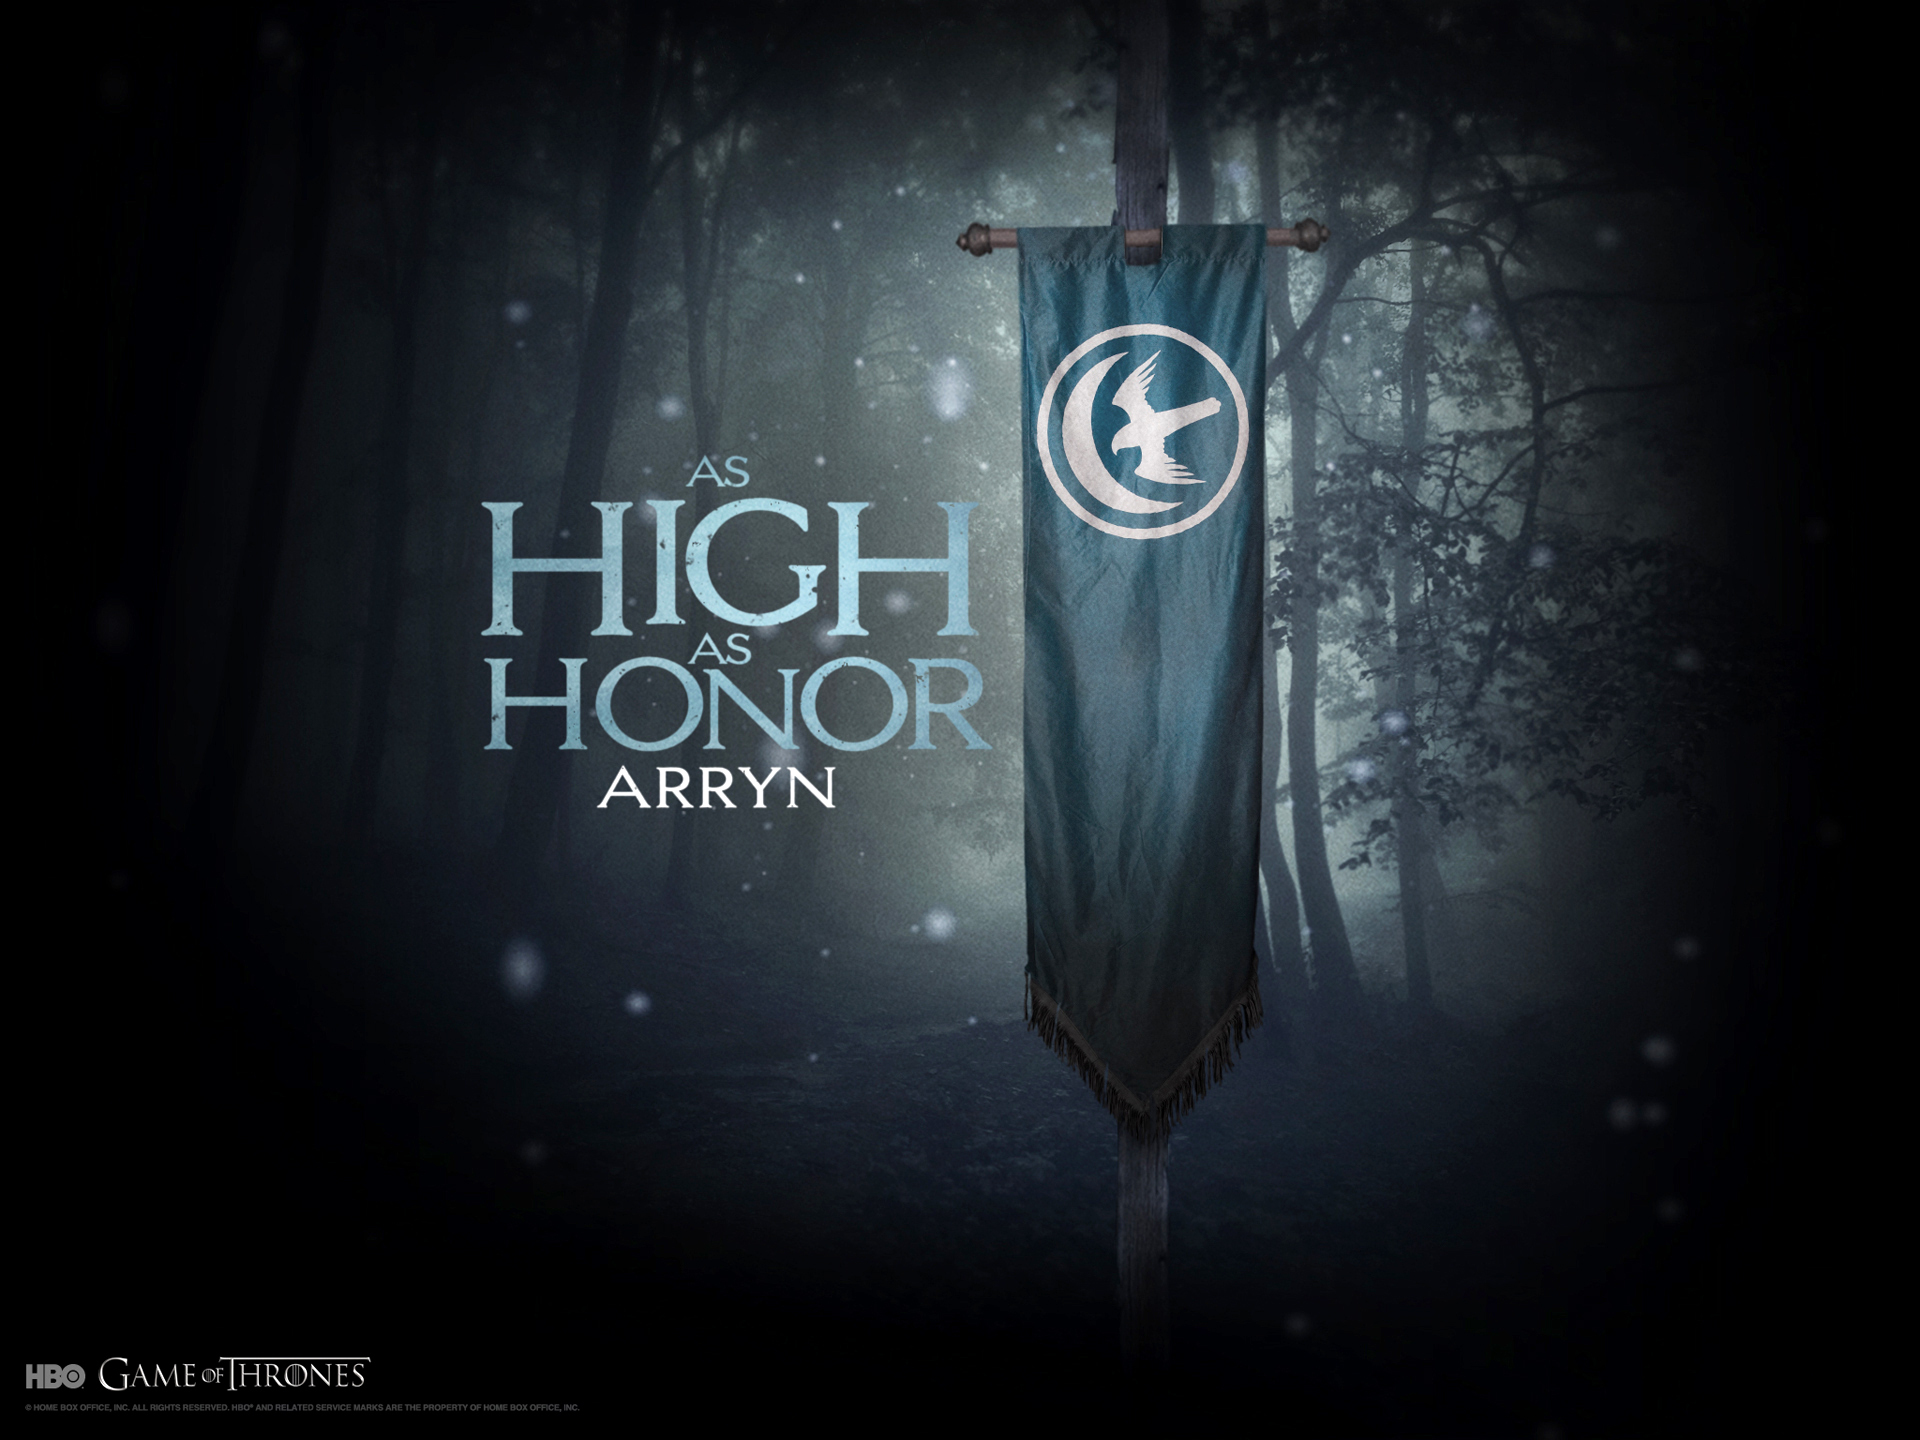 game of thrones wallpaper,text,font,logo,graphic design,darkness